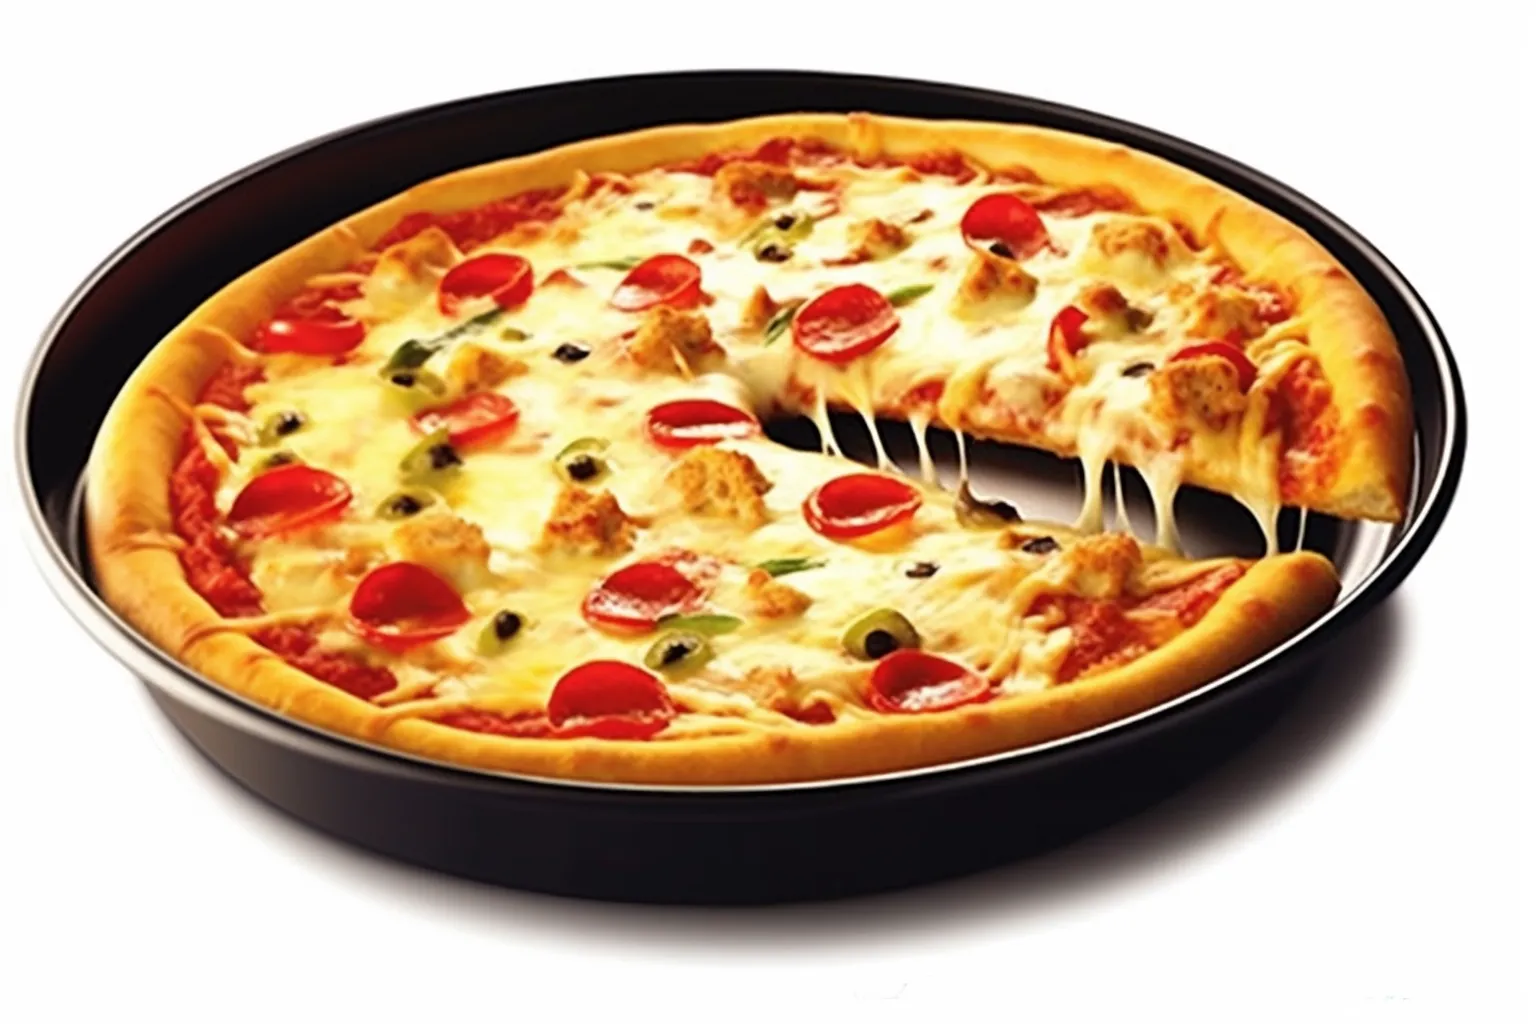 Excellent 16 inch cast iron pizza pan For Seamless And Fun Baking